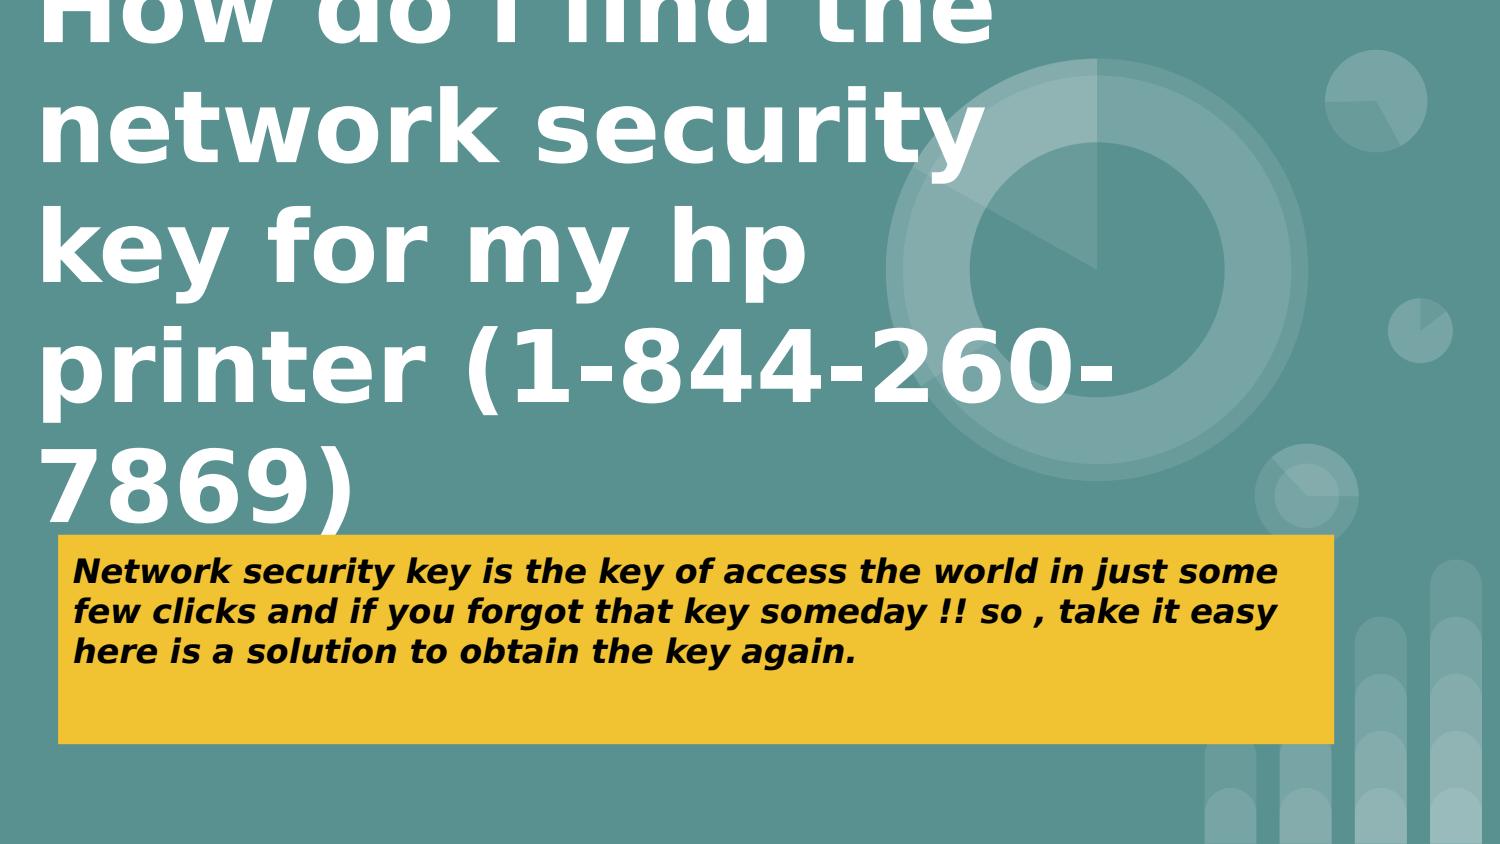 What is My Network Security Key?